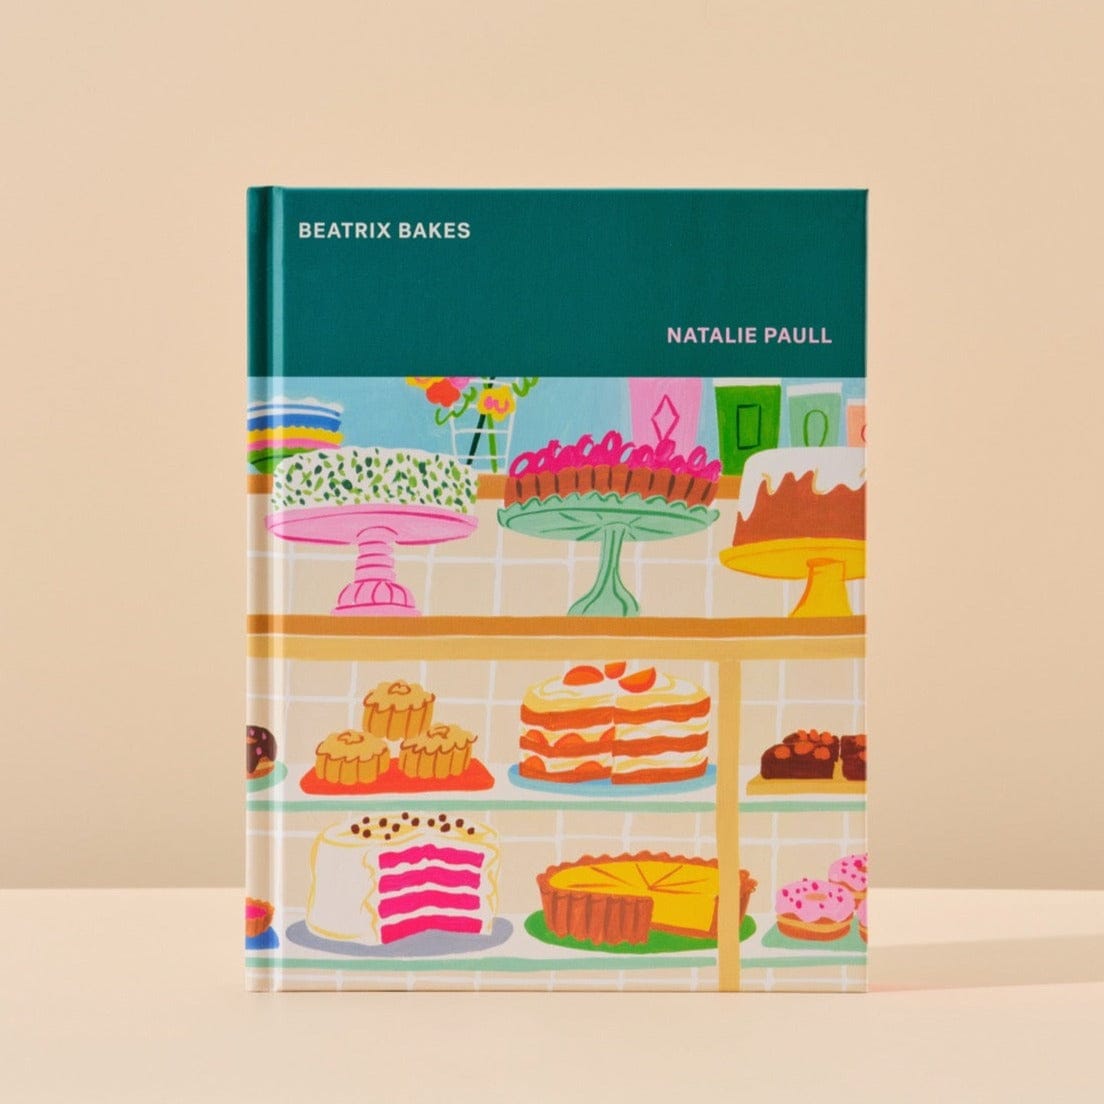 This image displays the cover of Beatrix Bakes by Natalie Paull